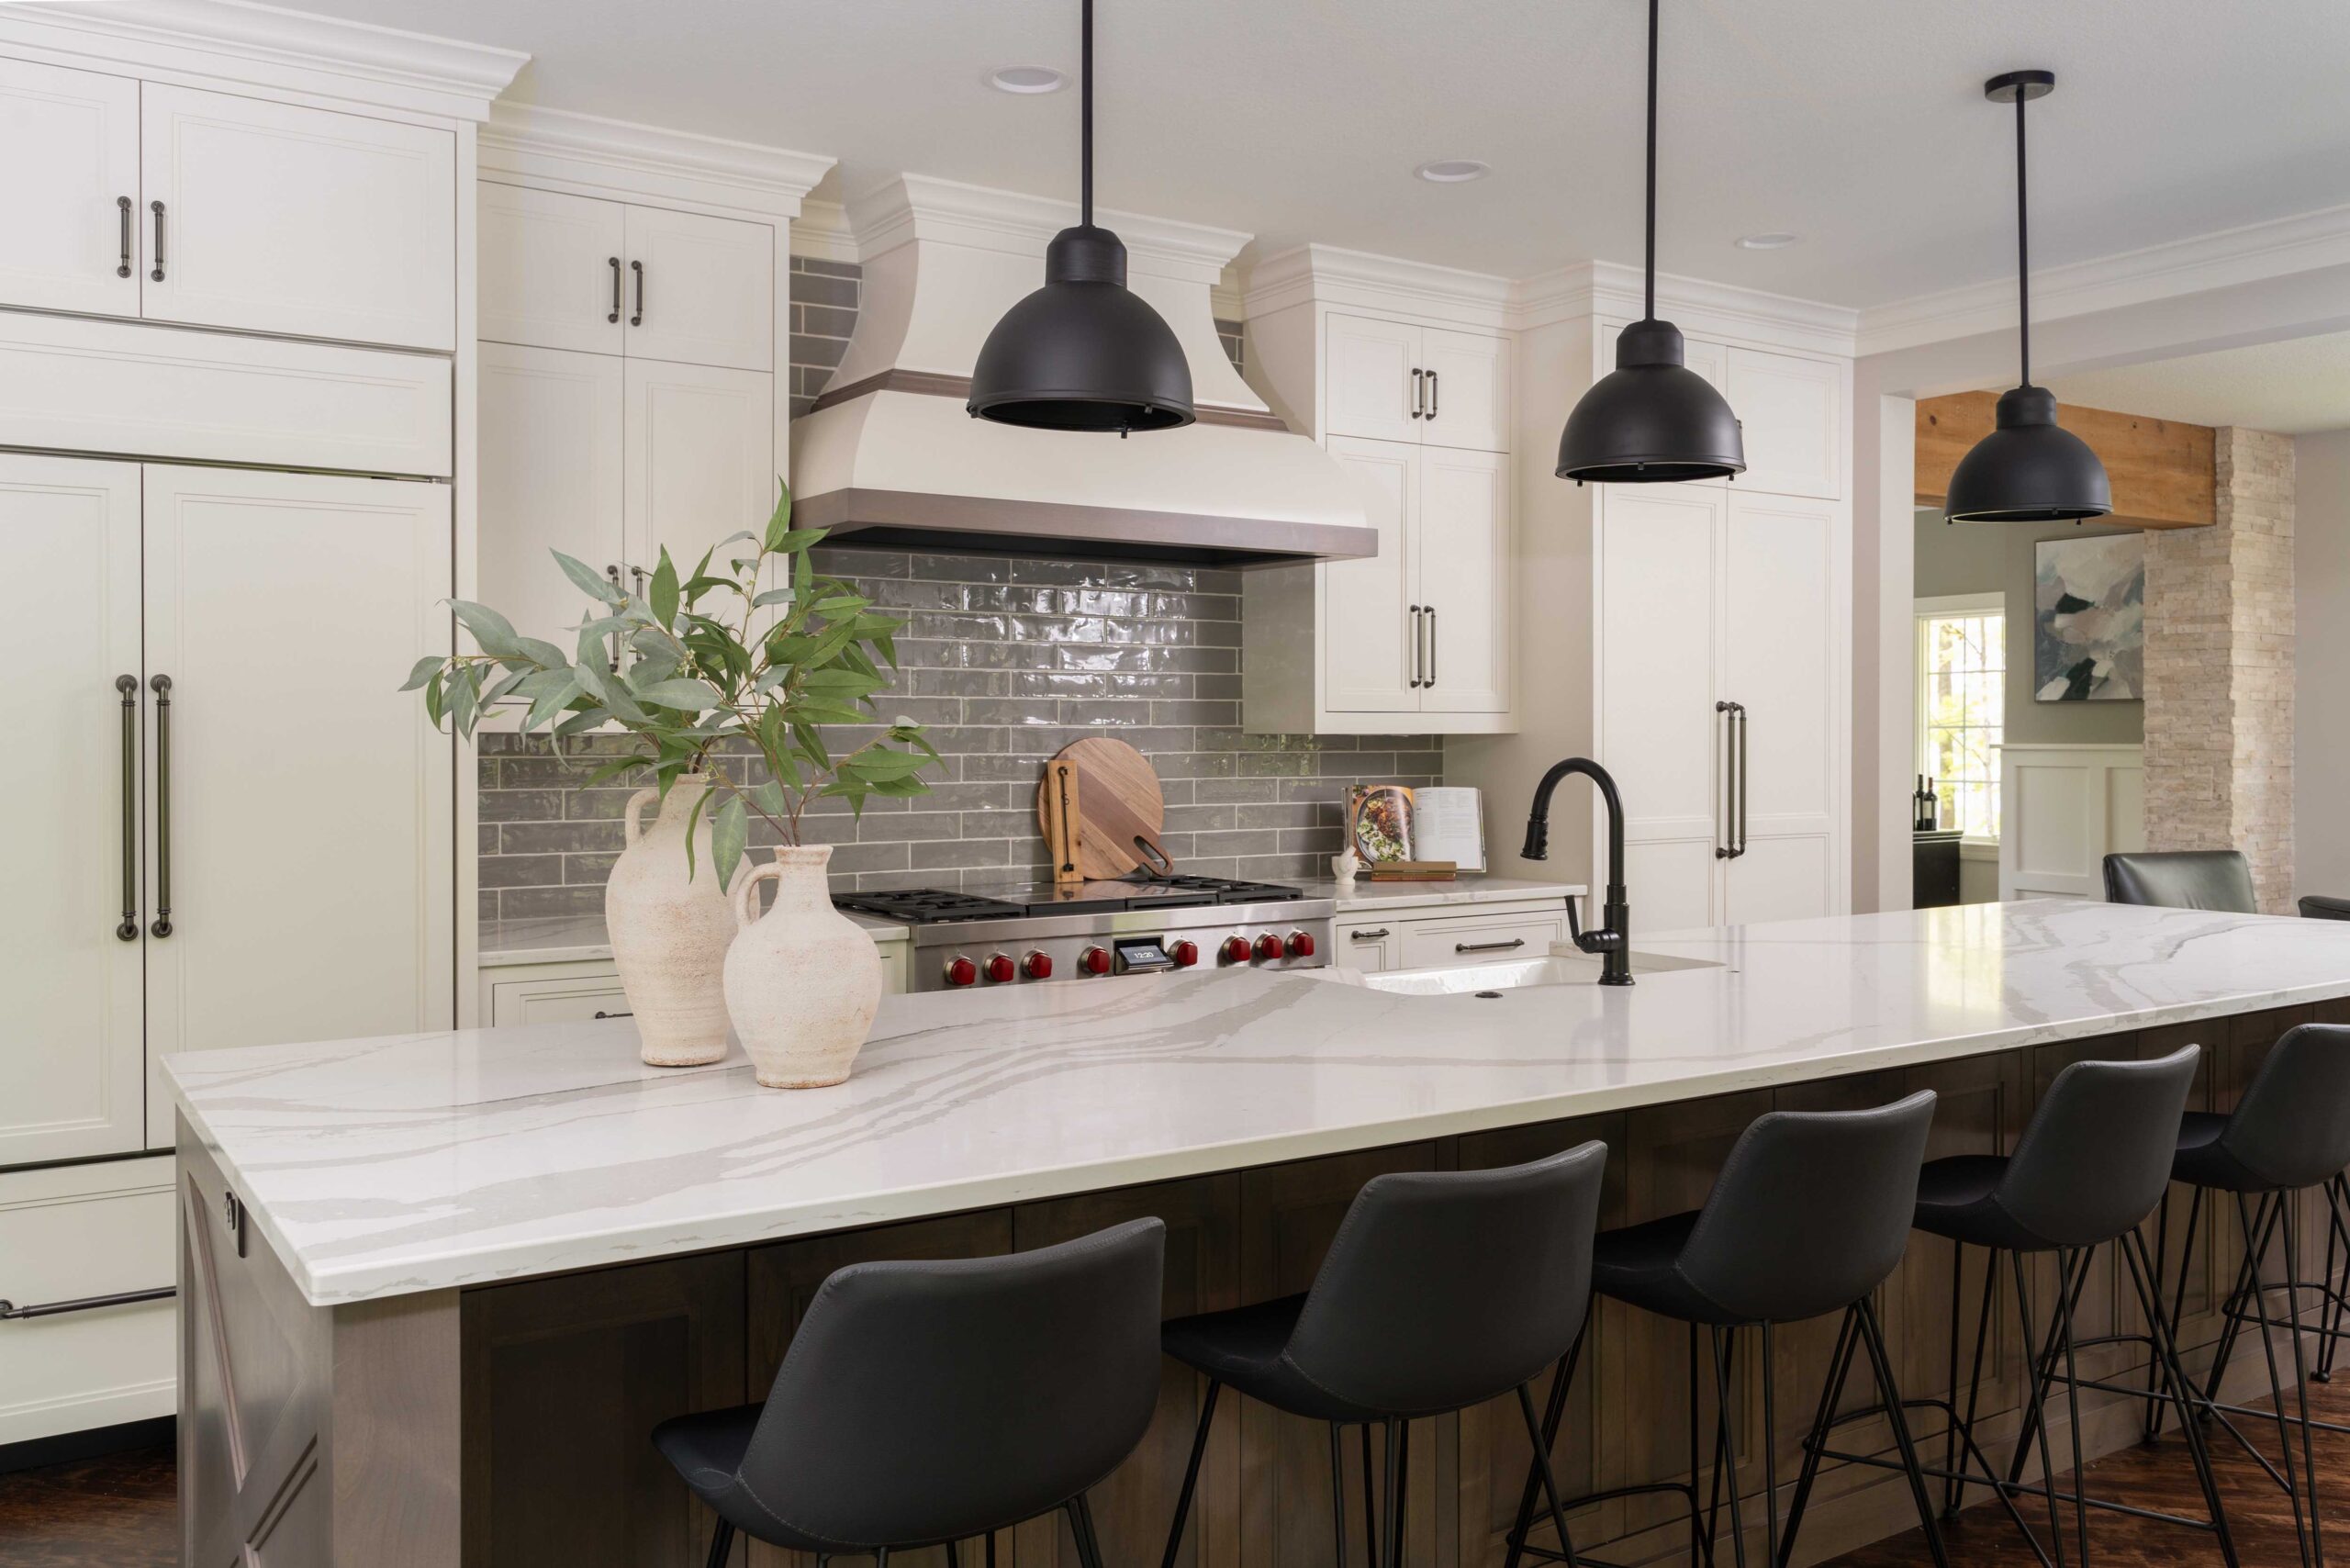 A kitchen with a center island and black stools, located on Woodside Road in Minnetonka has recently undergone a remodel.